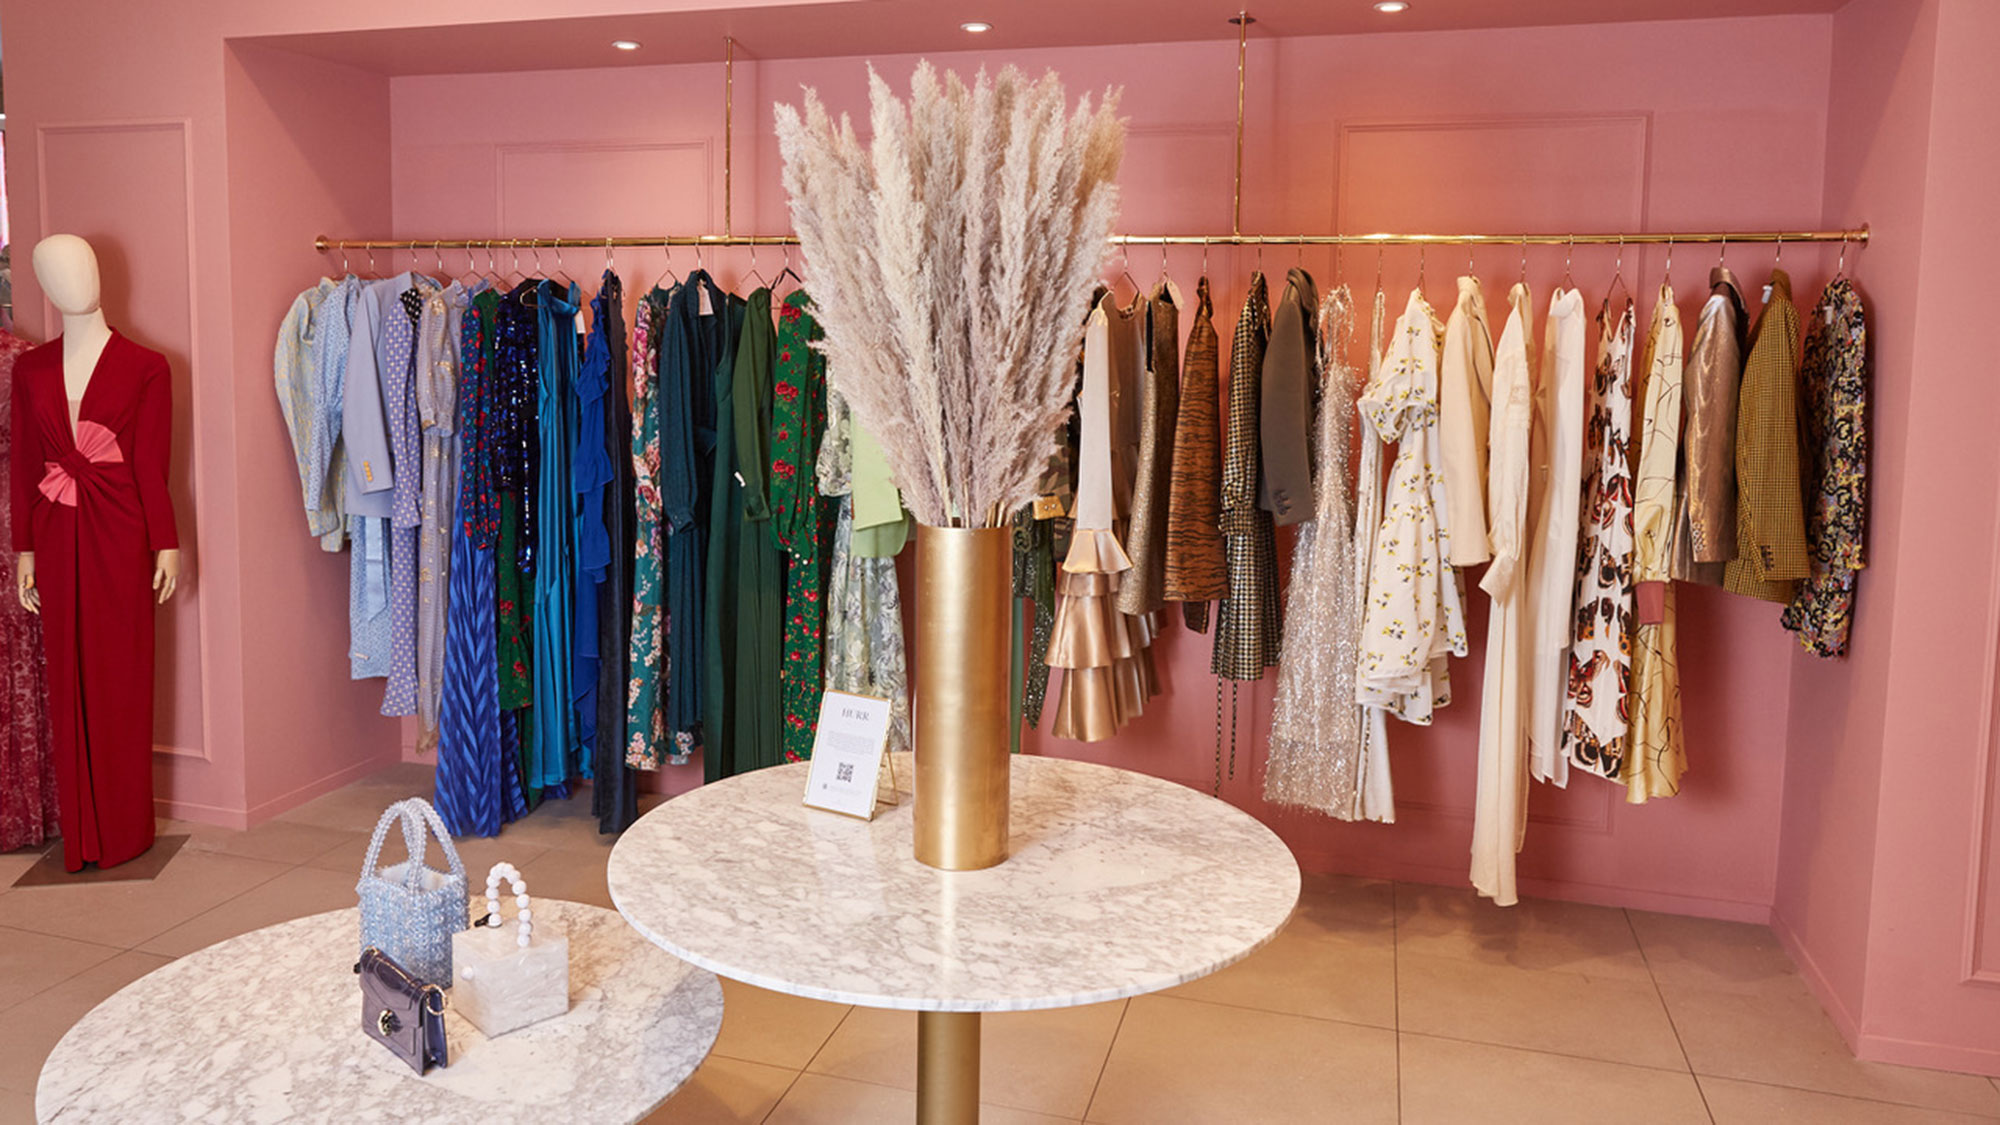 This store lets you rent designer dresses for a fraction of the cost